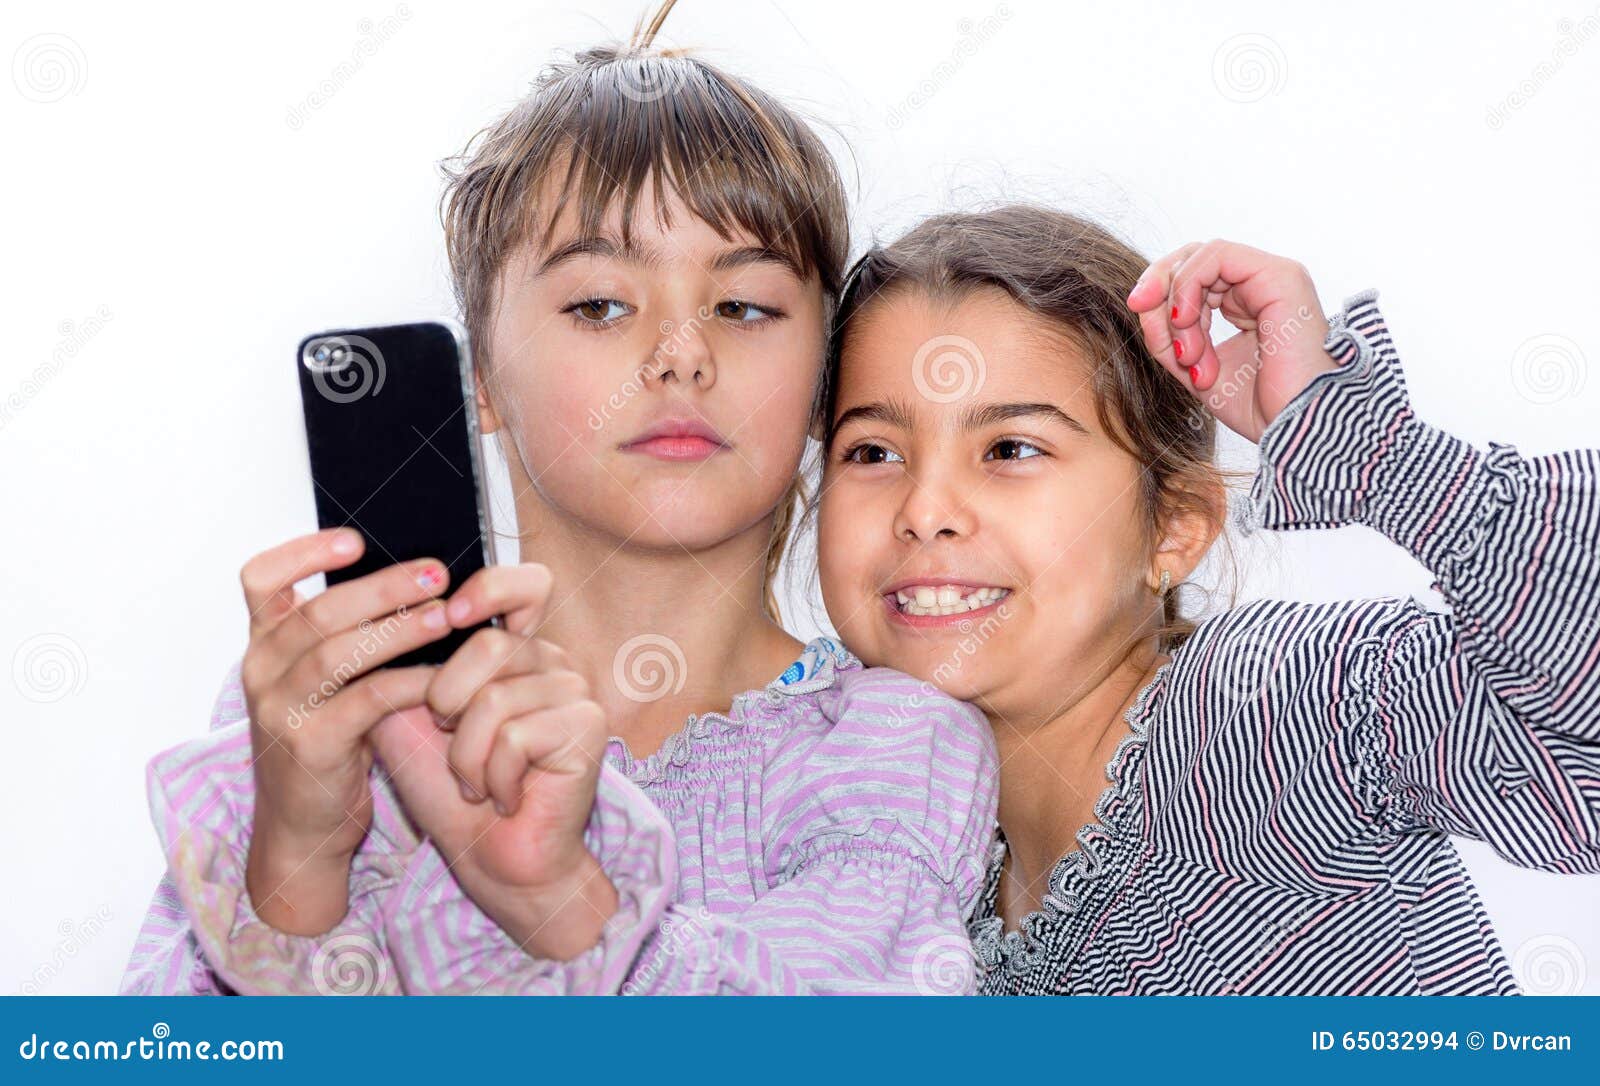 Cute Little Girls Making Selfie Stock Photo - Image of background ...